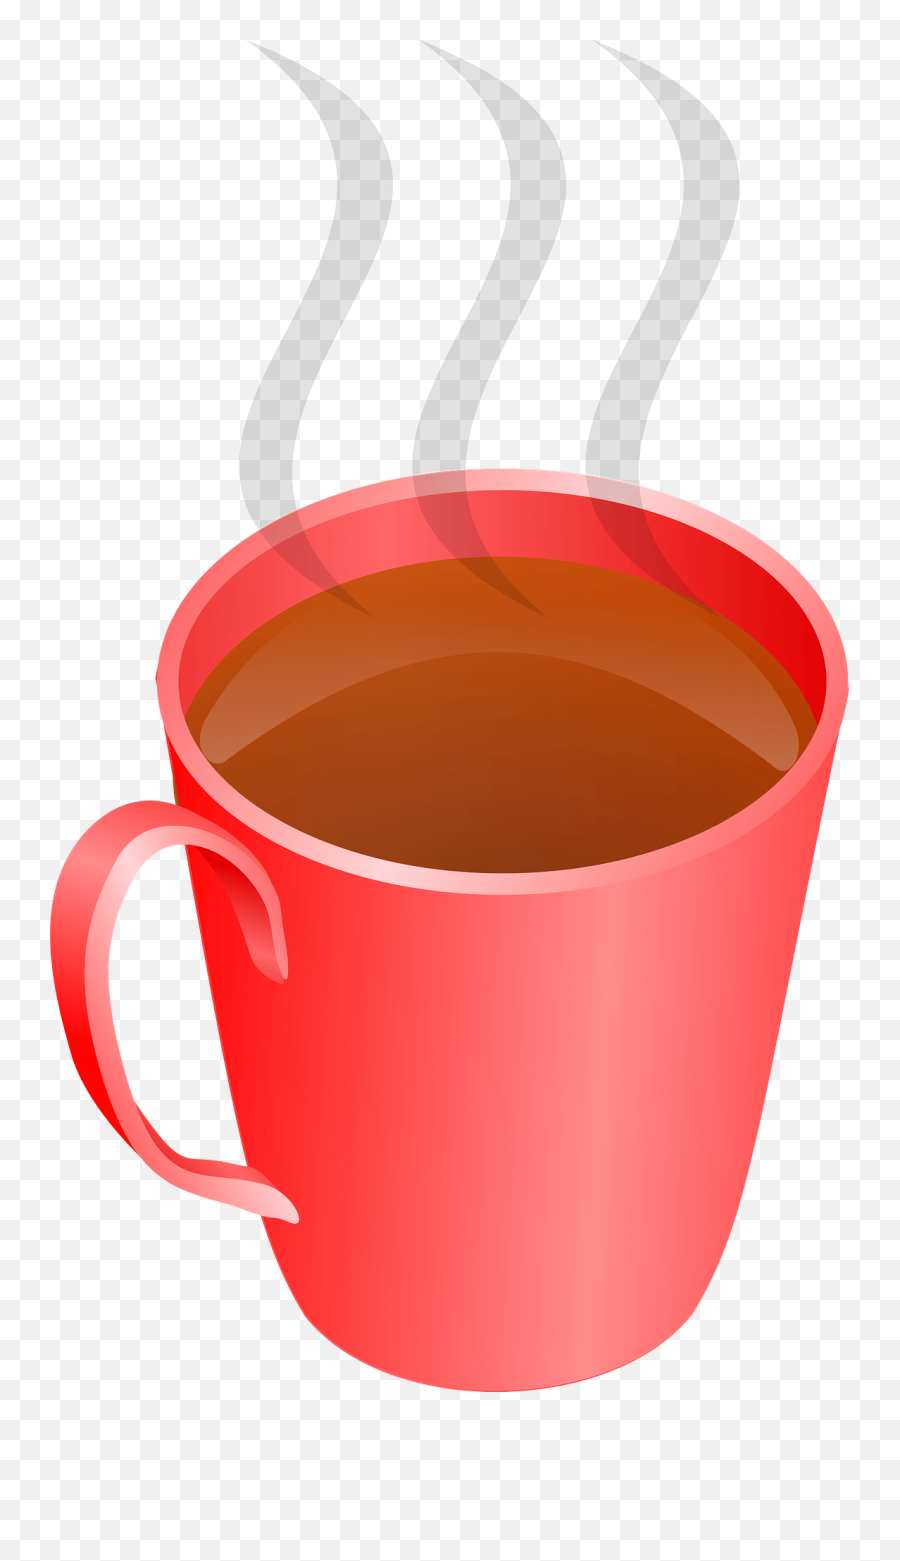 Red Cup With Hot Beverage Clipart - Cartoon Cup Of Tea Emoji,Red Cup Emoji